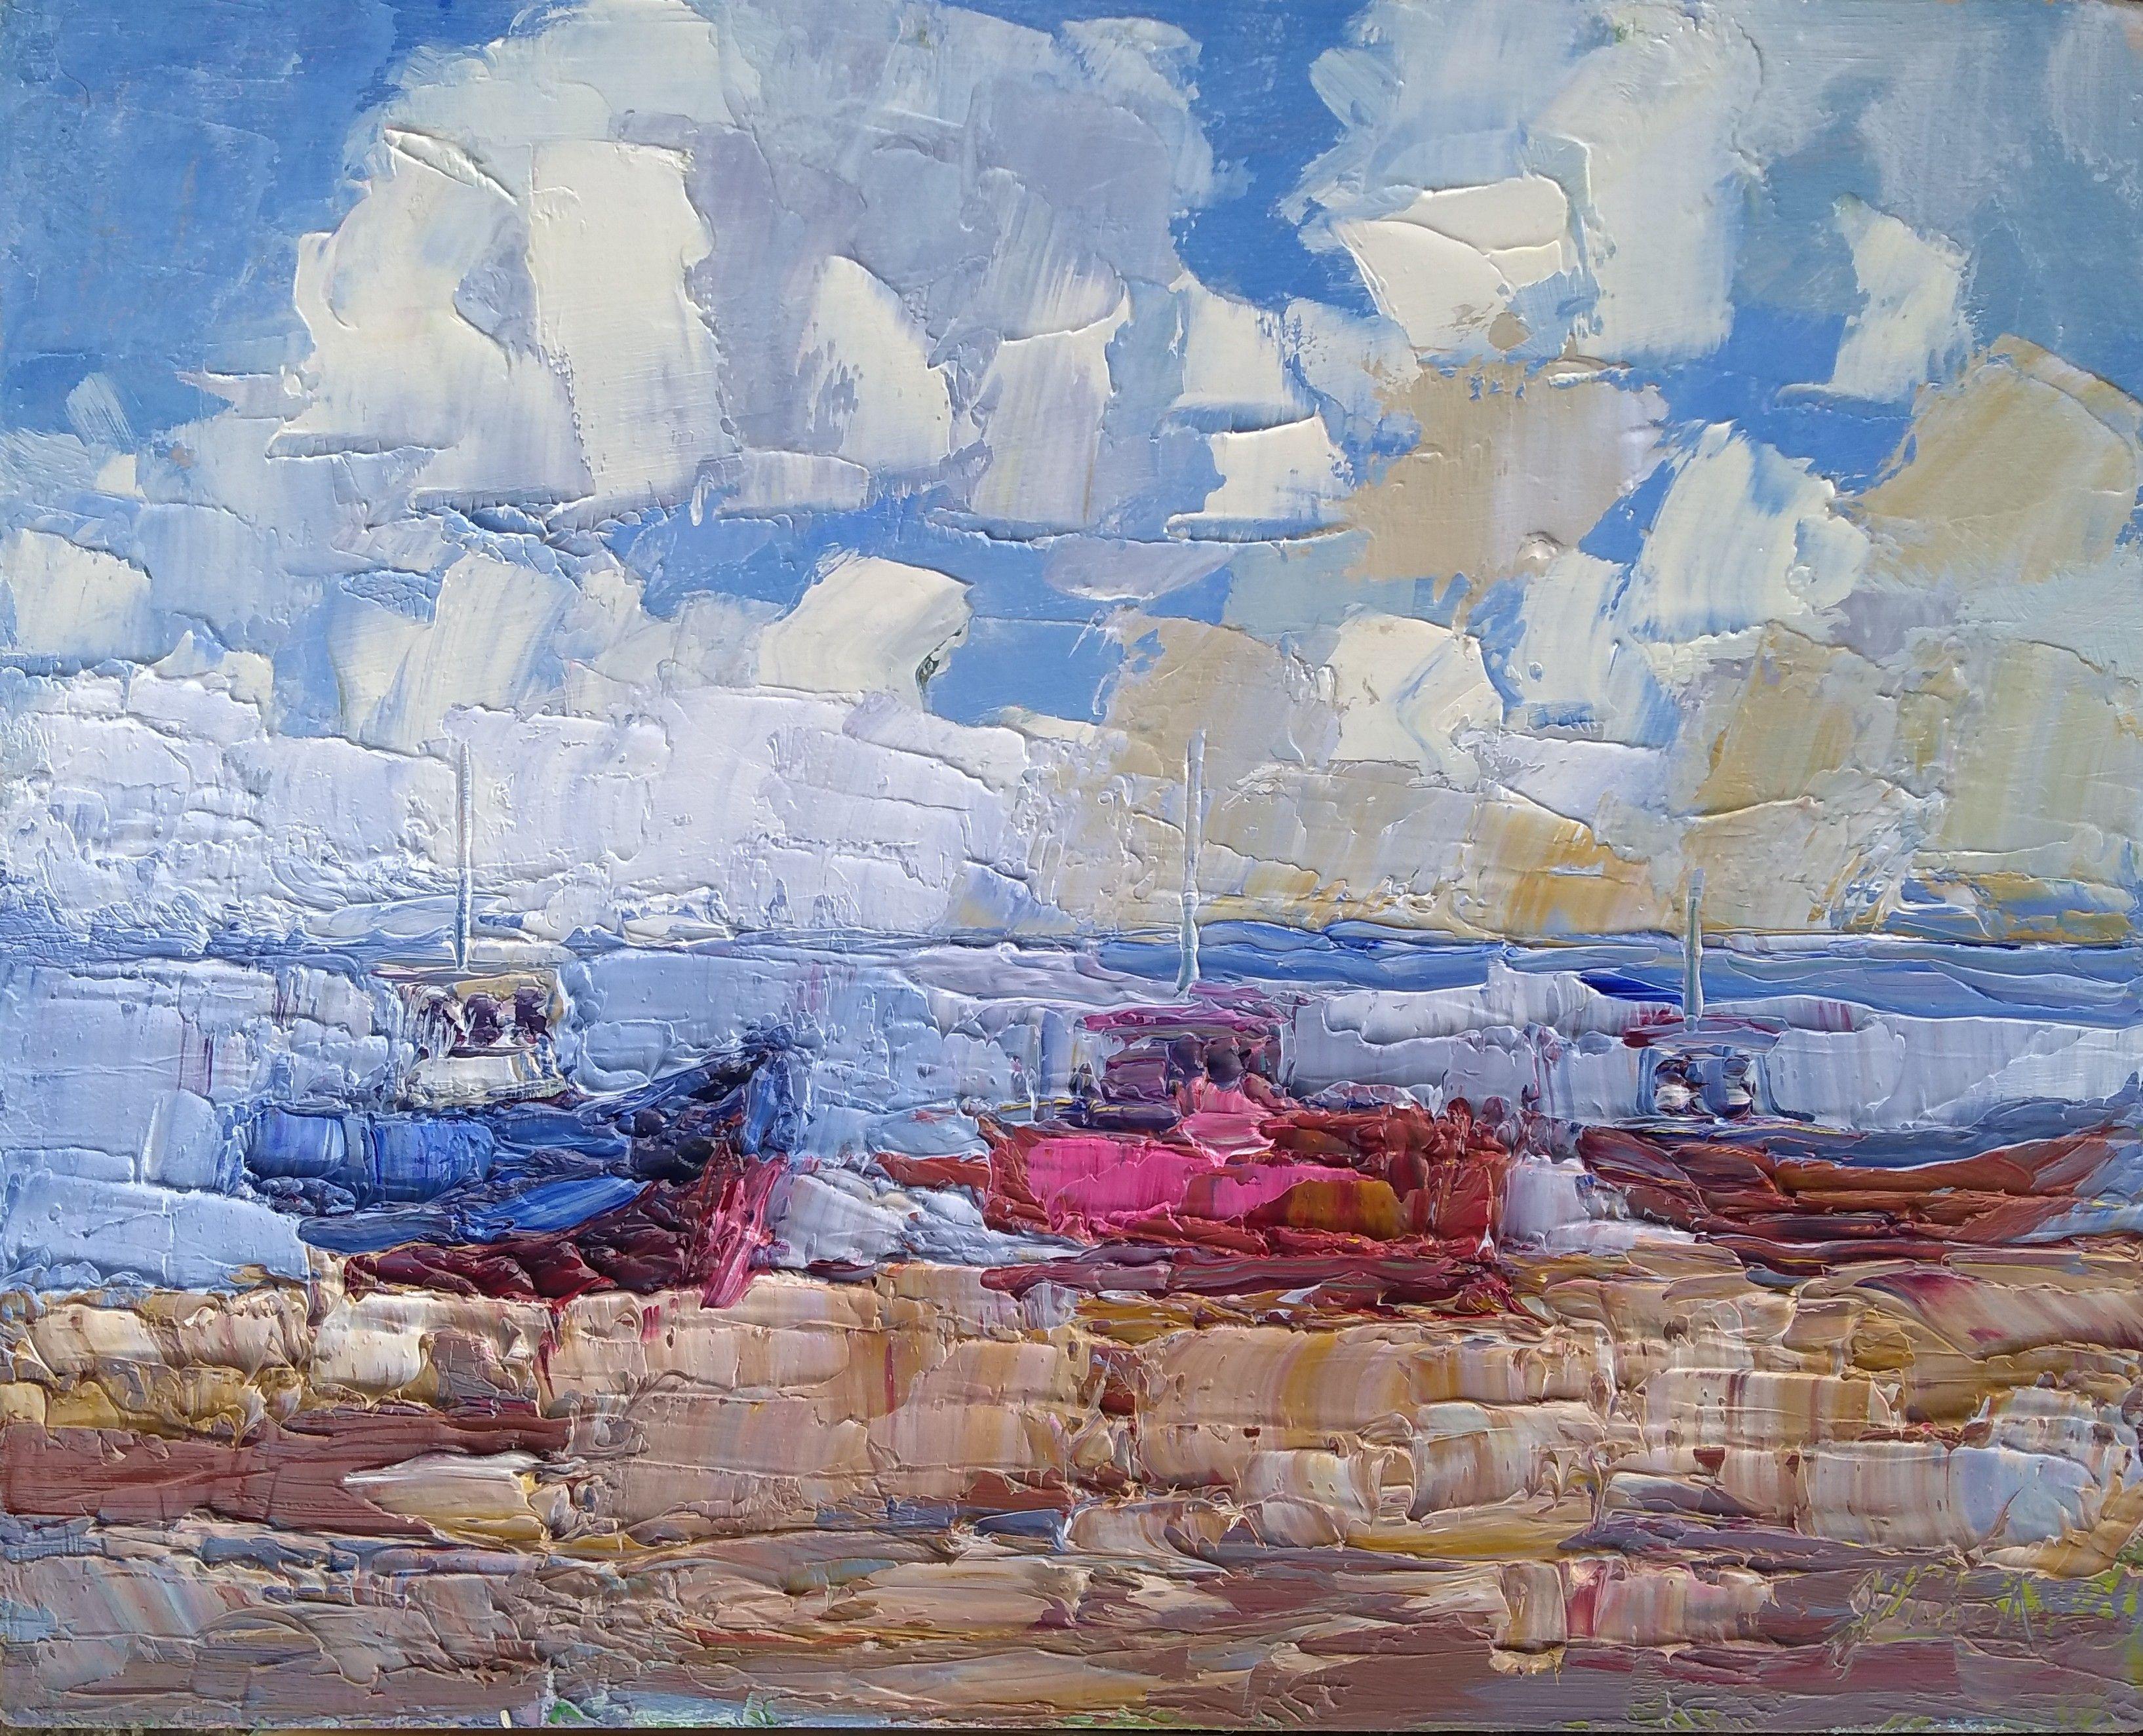 Boats on the beach at Hastings UK. Oil on linen panel 8x10x0.25 ins :: Painting :: Impressionist :: This piece comes with an official certificate of authenticity signed by the artist :: Ready to Hang: No :: Signed: Yes :: Signature Location: Bottom